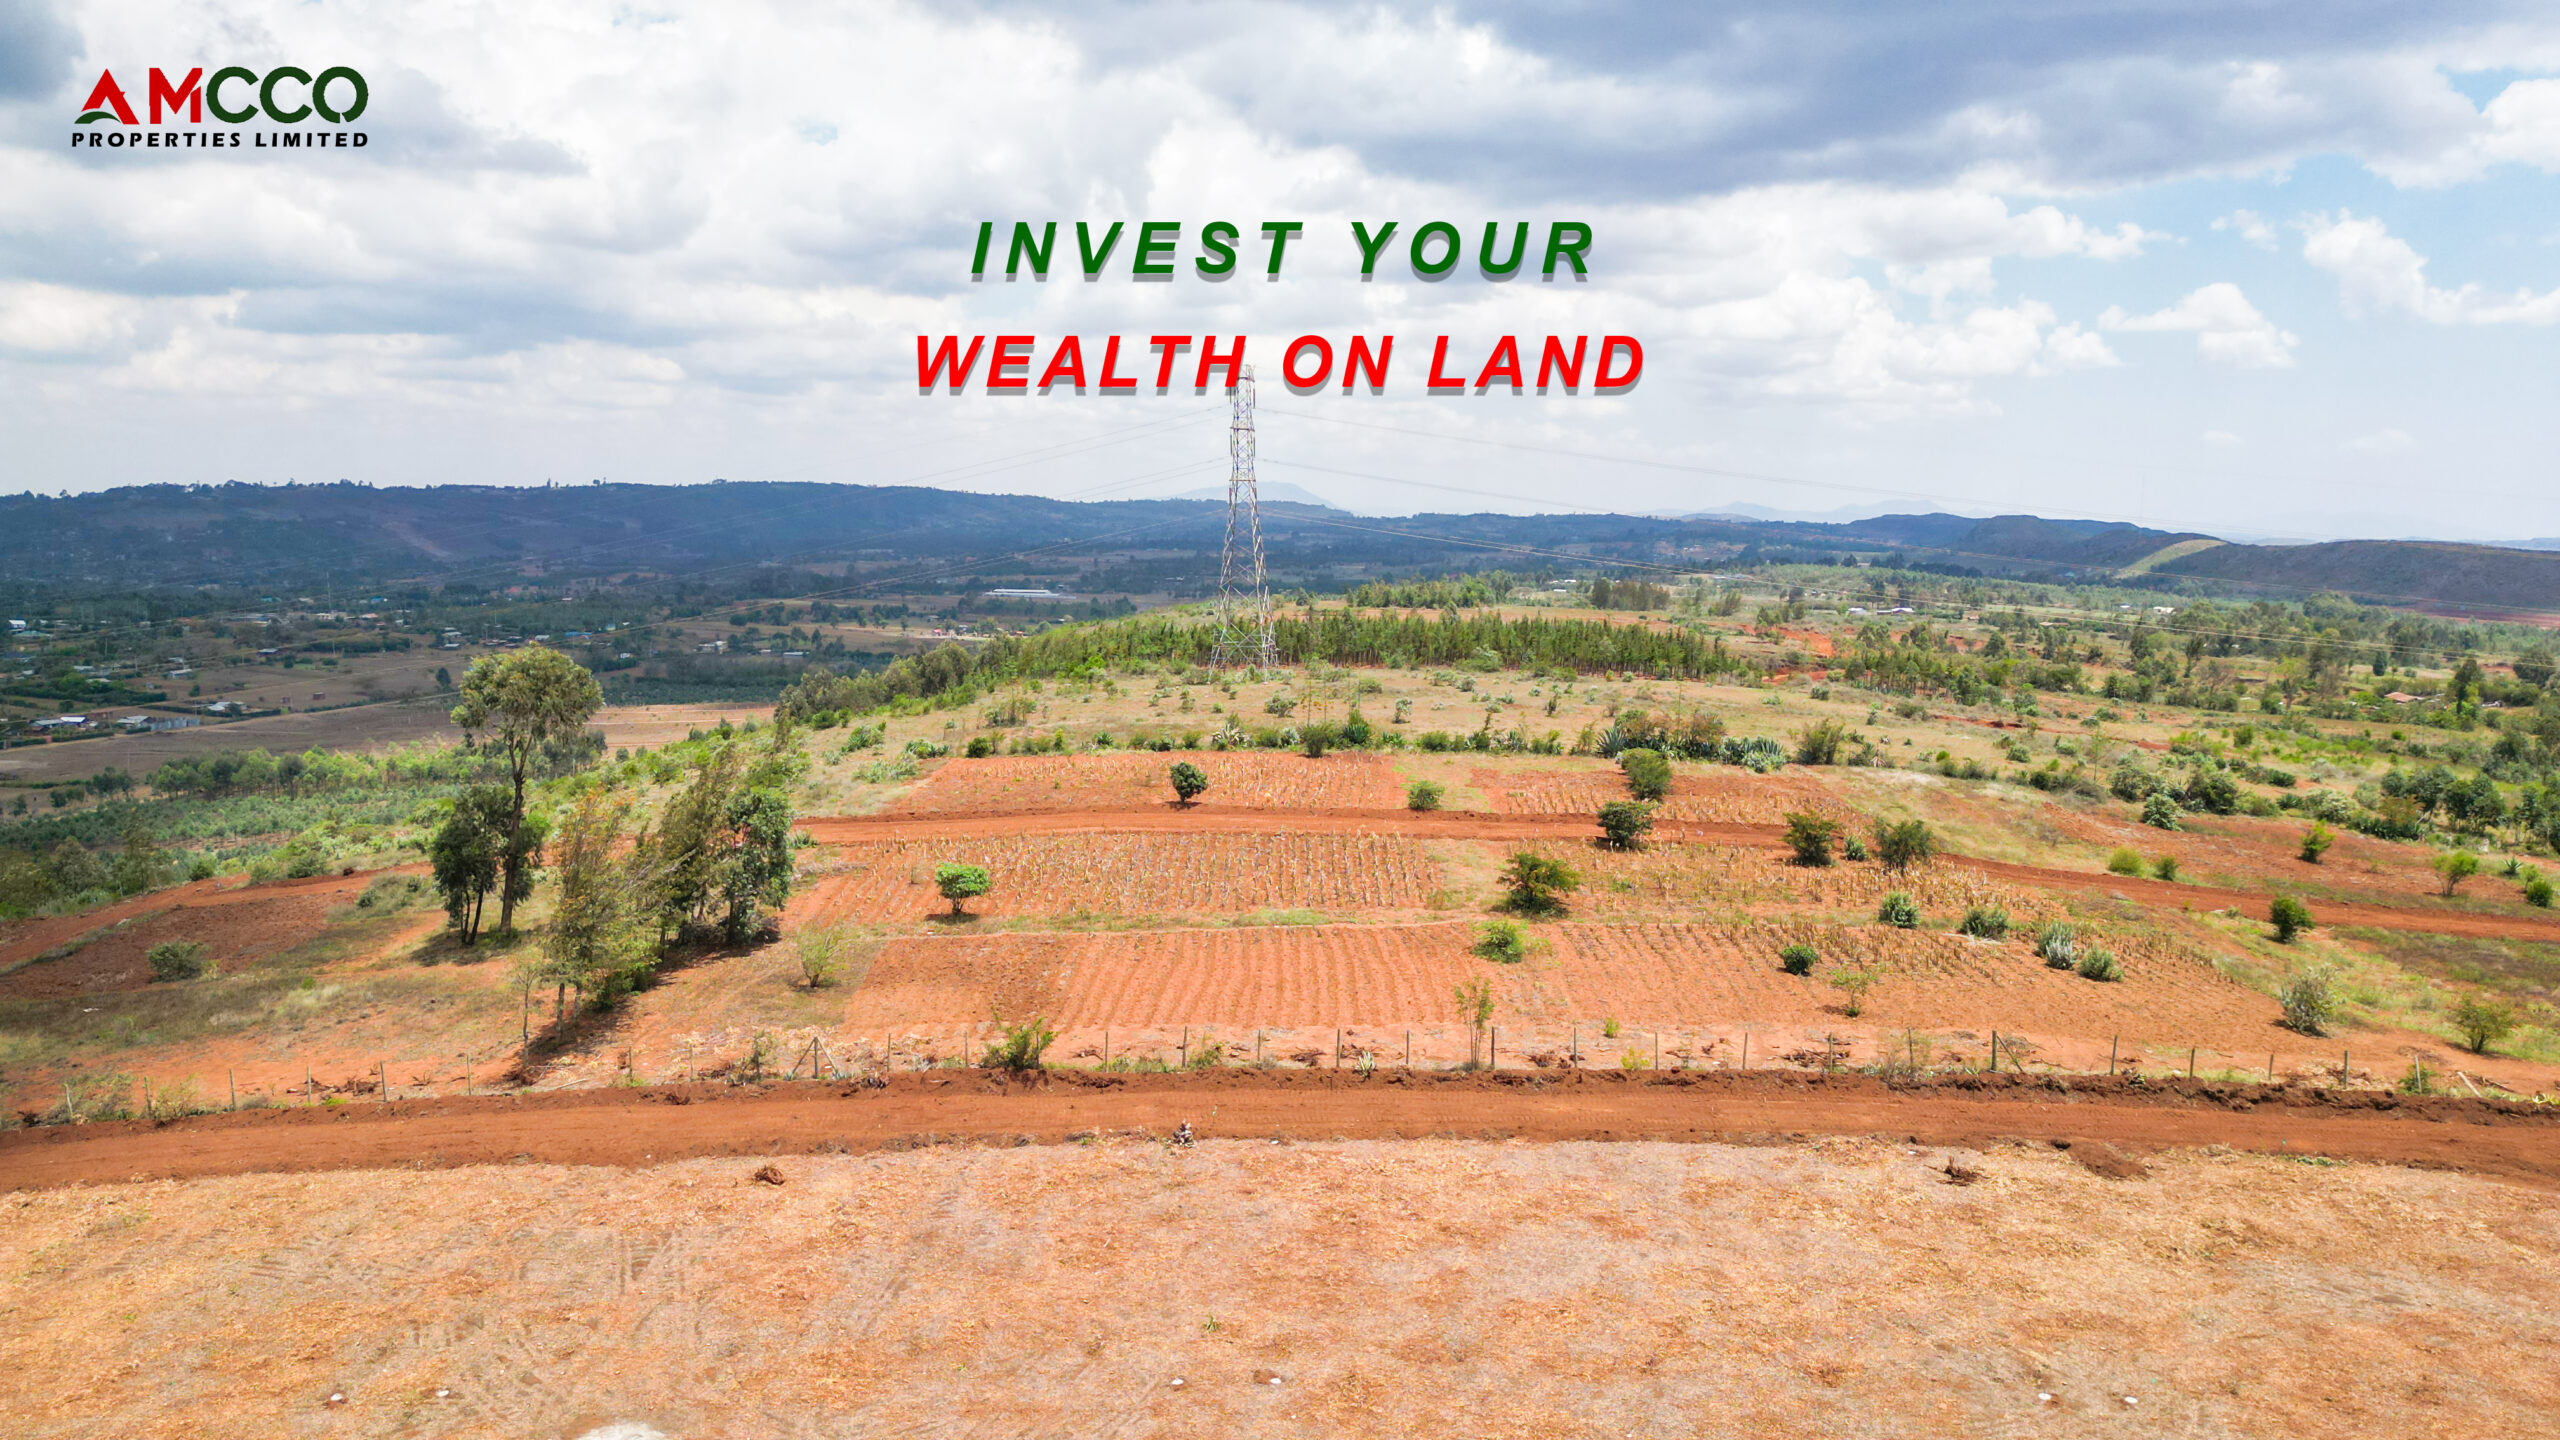 6 Facts that Tell You Why You Should Invest in Land